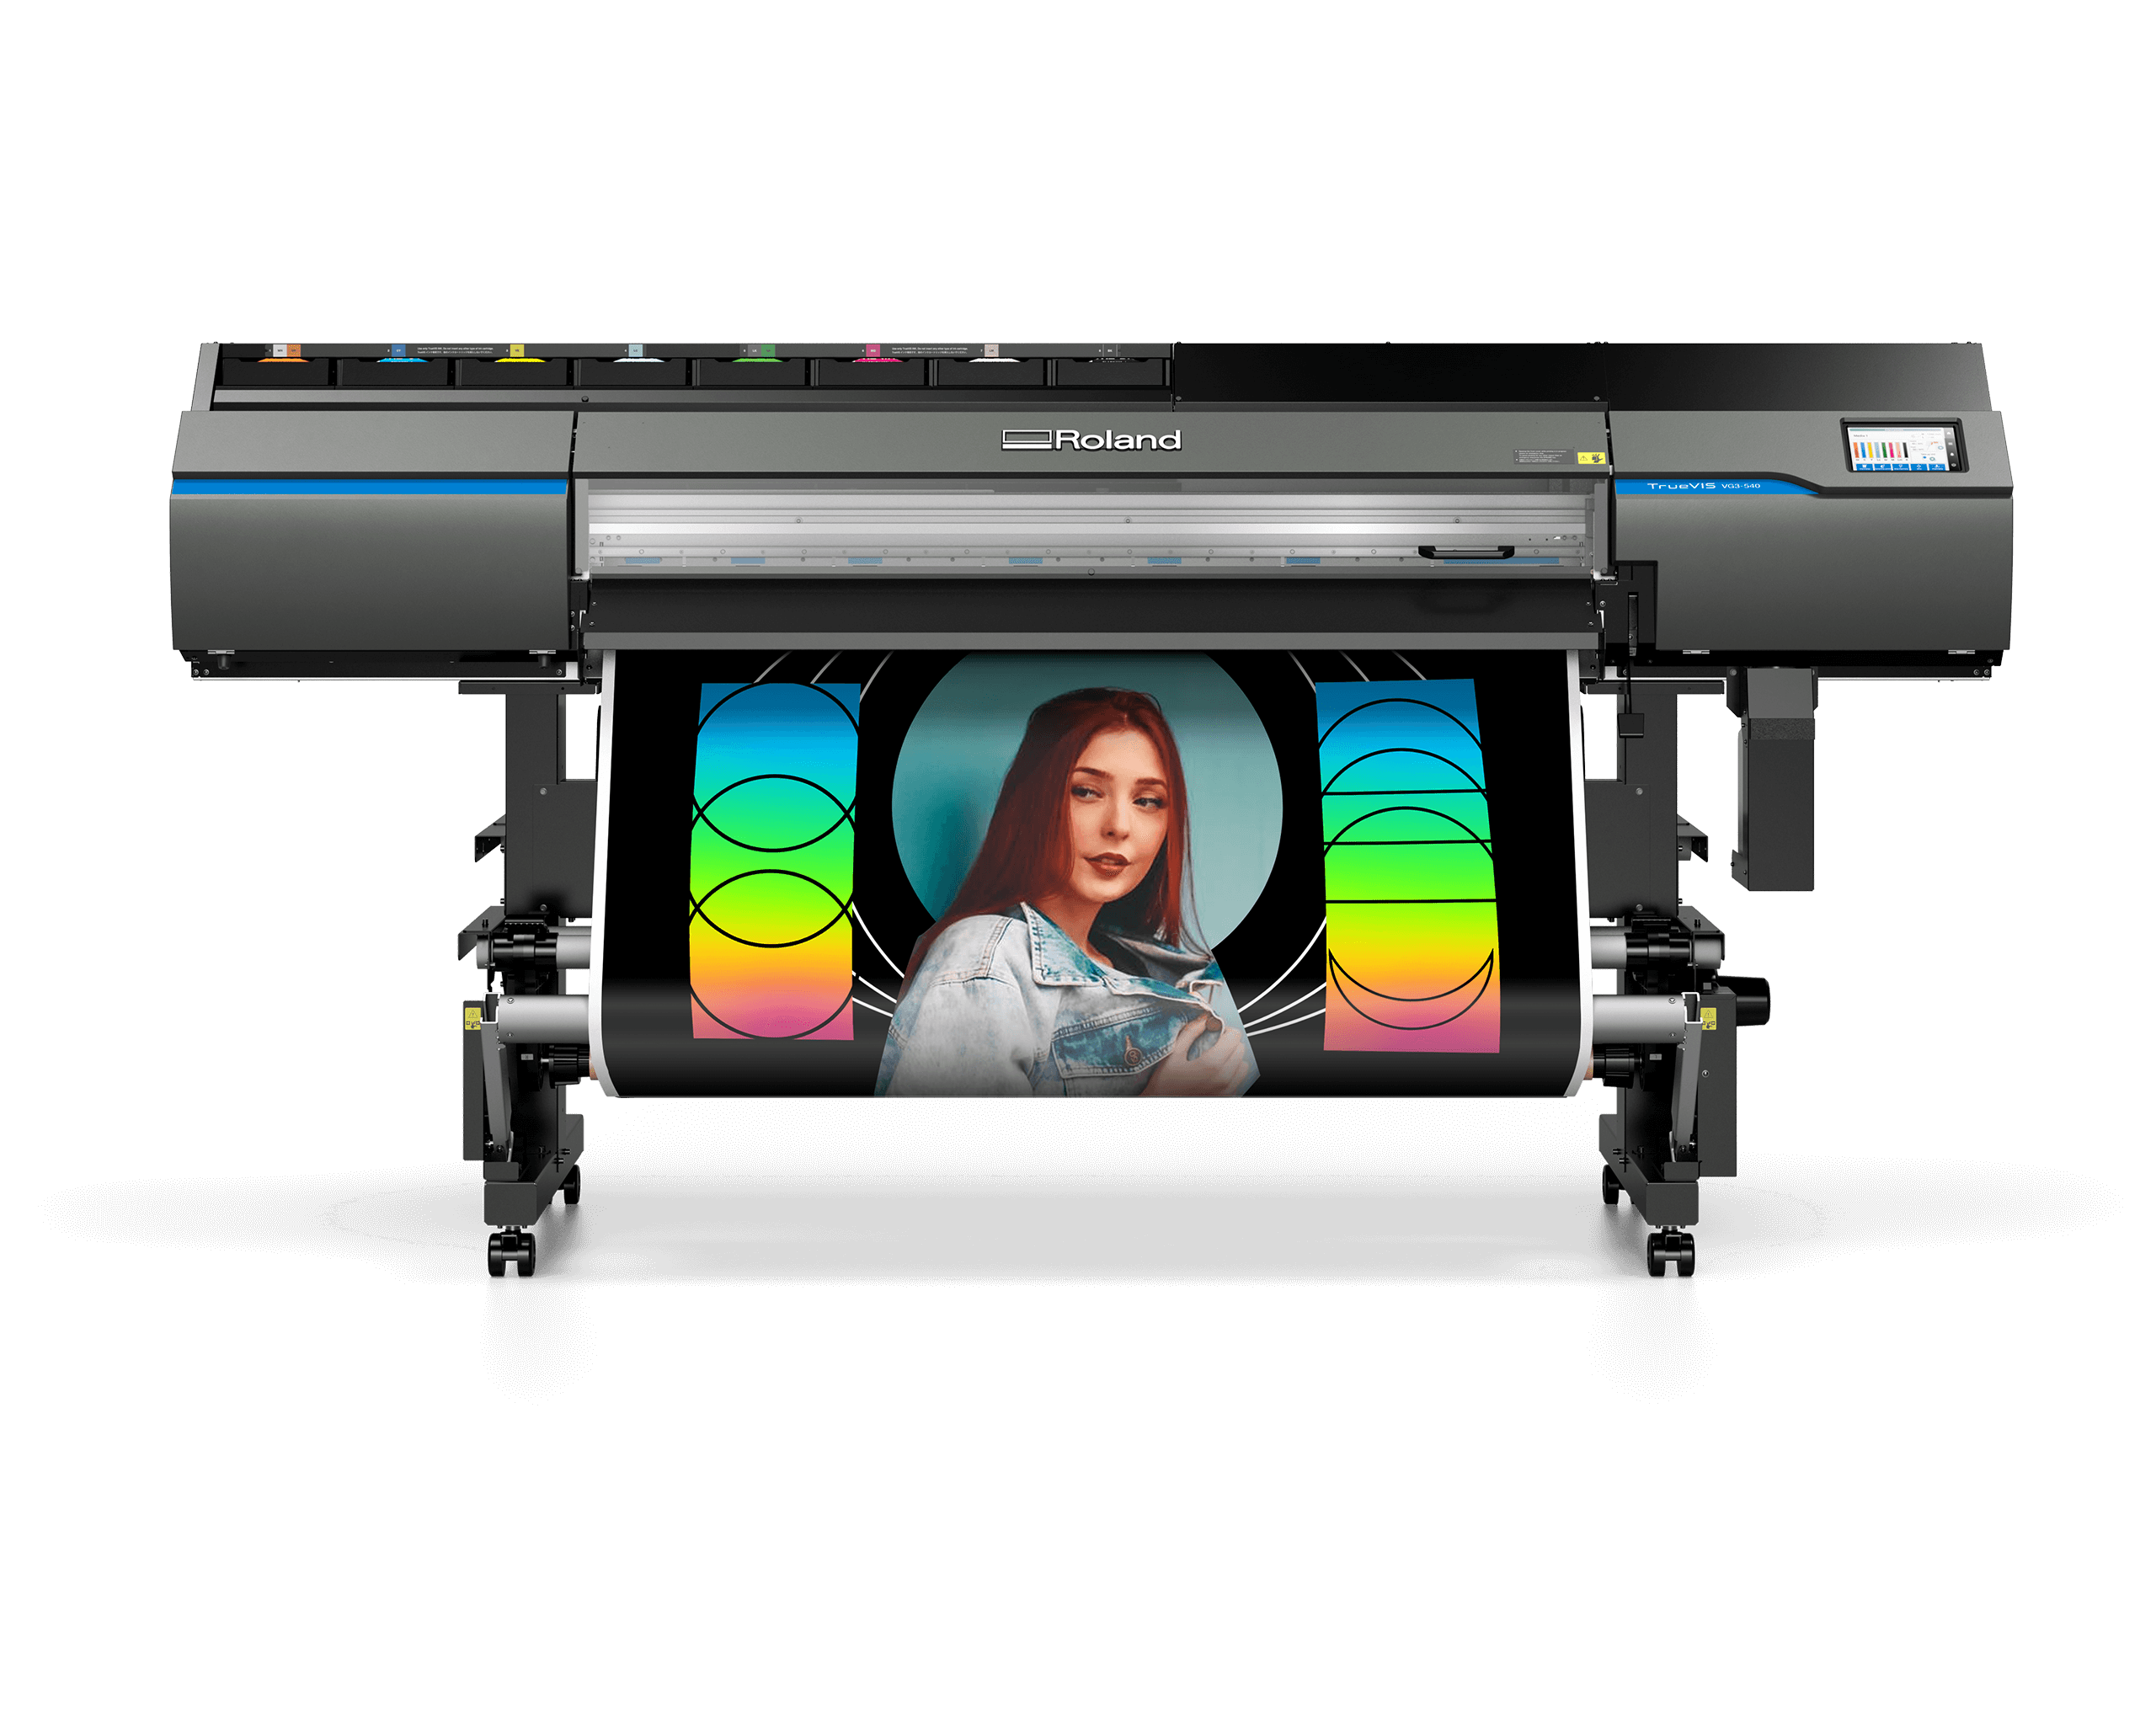 roland-VG3-540-wide-format-printer-mac-papers